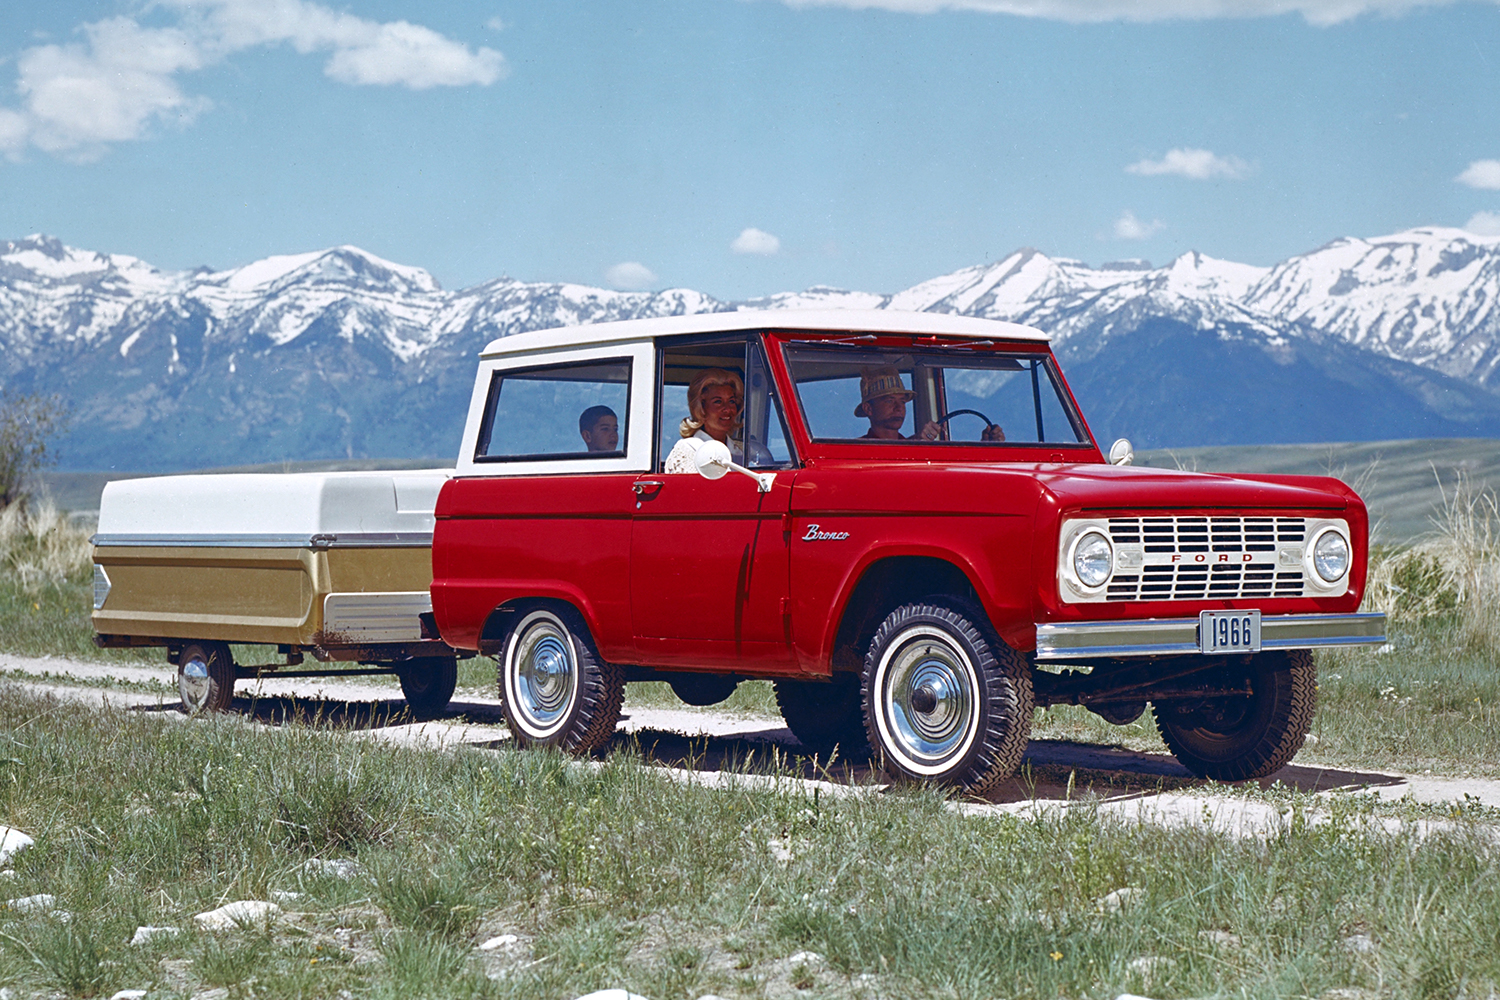 1966 red and white Ford Bronco towing a camper